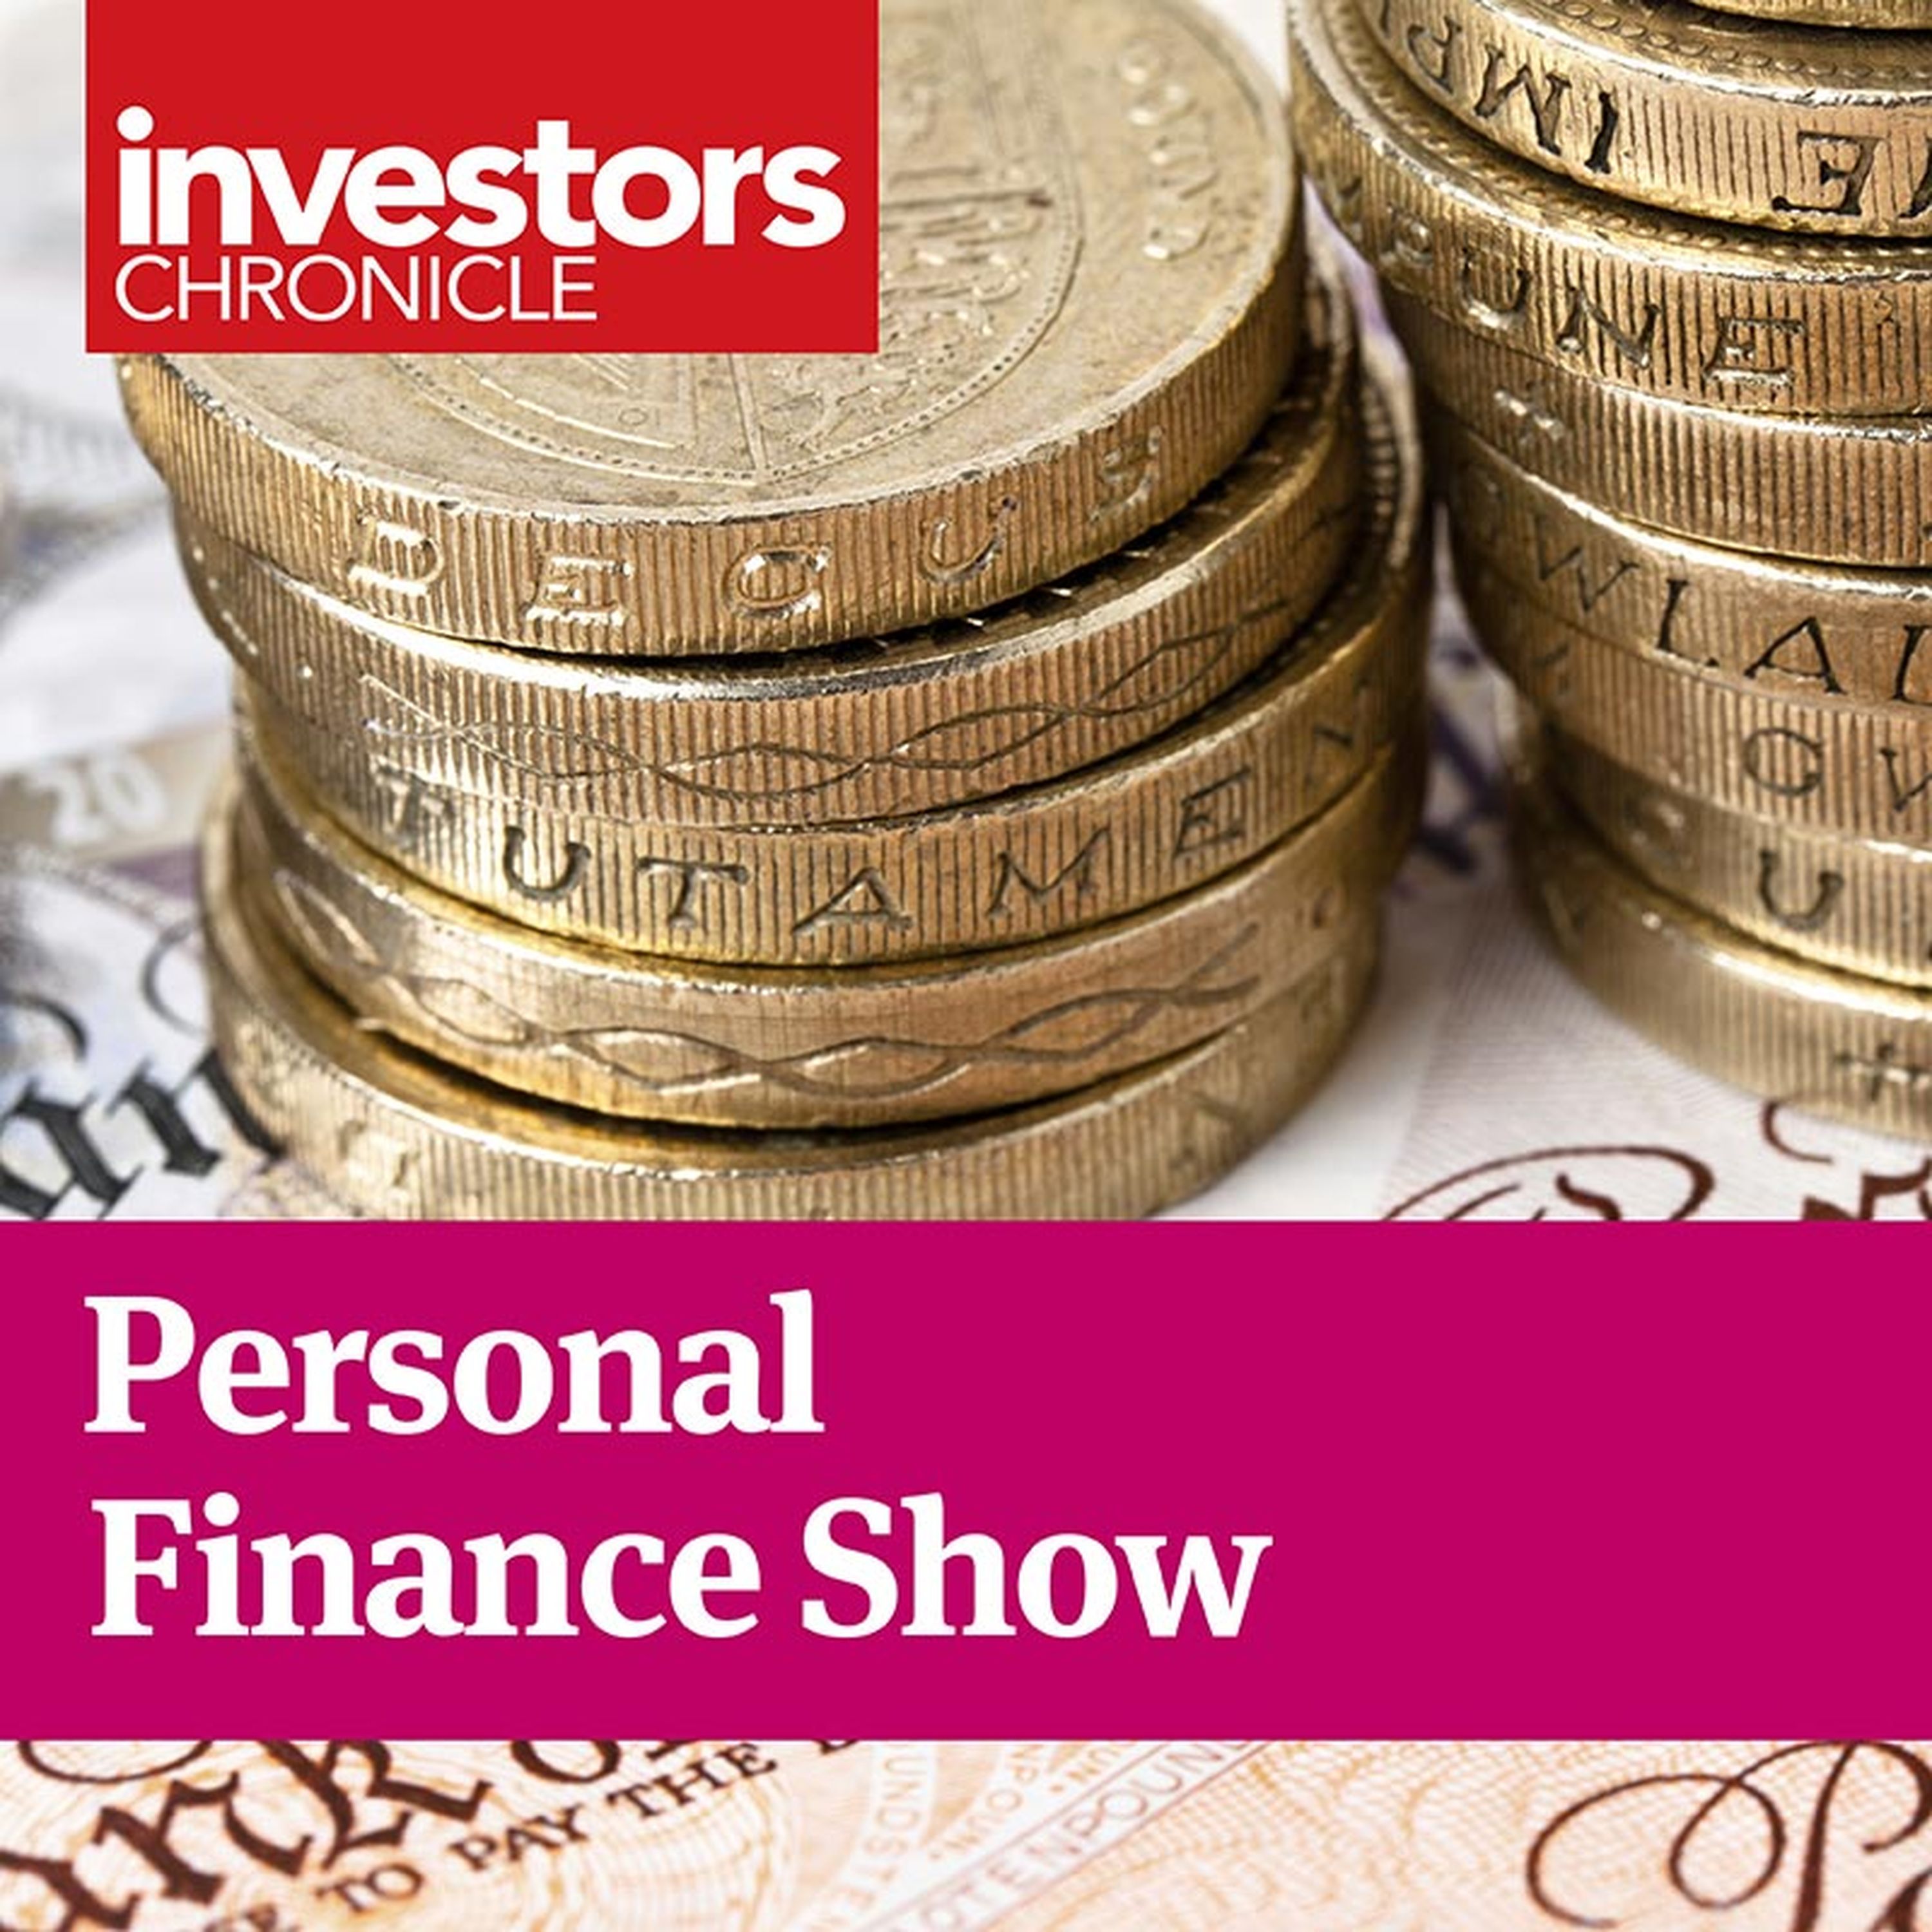 Personal Finance Show: Exploiting value